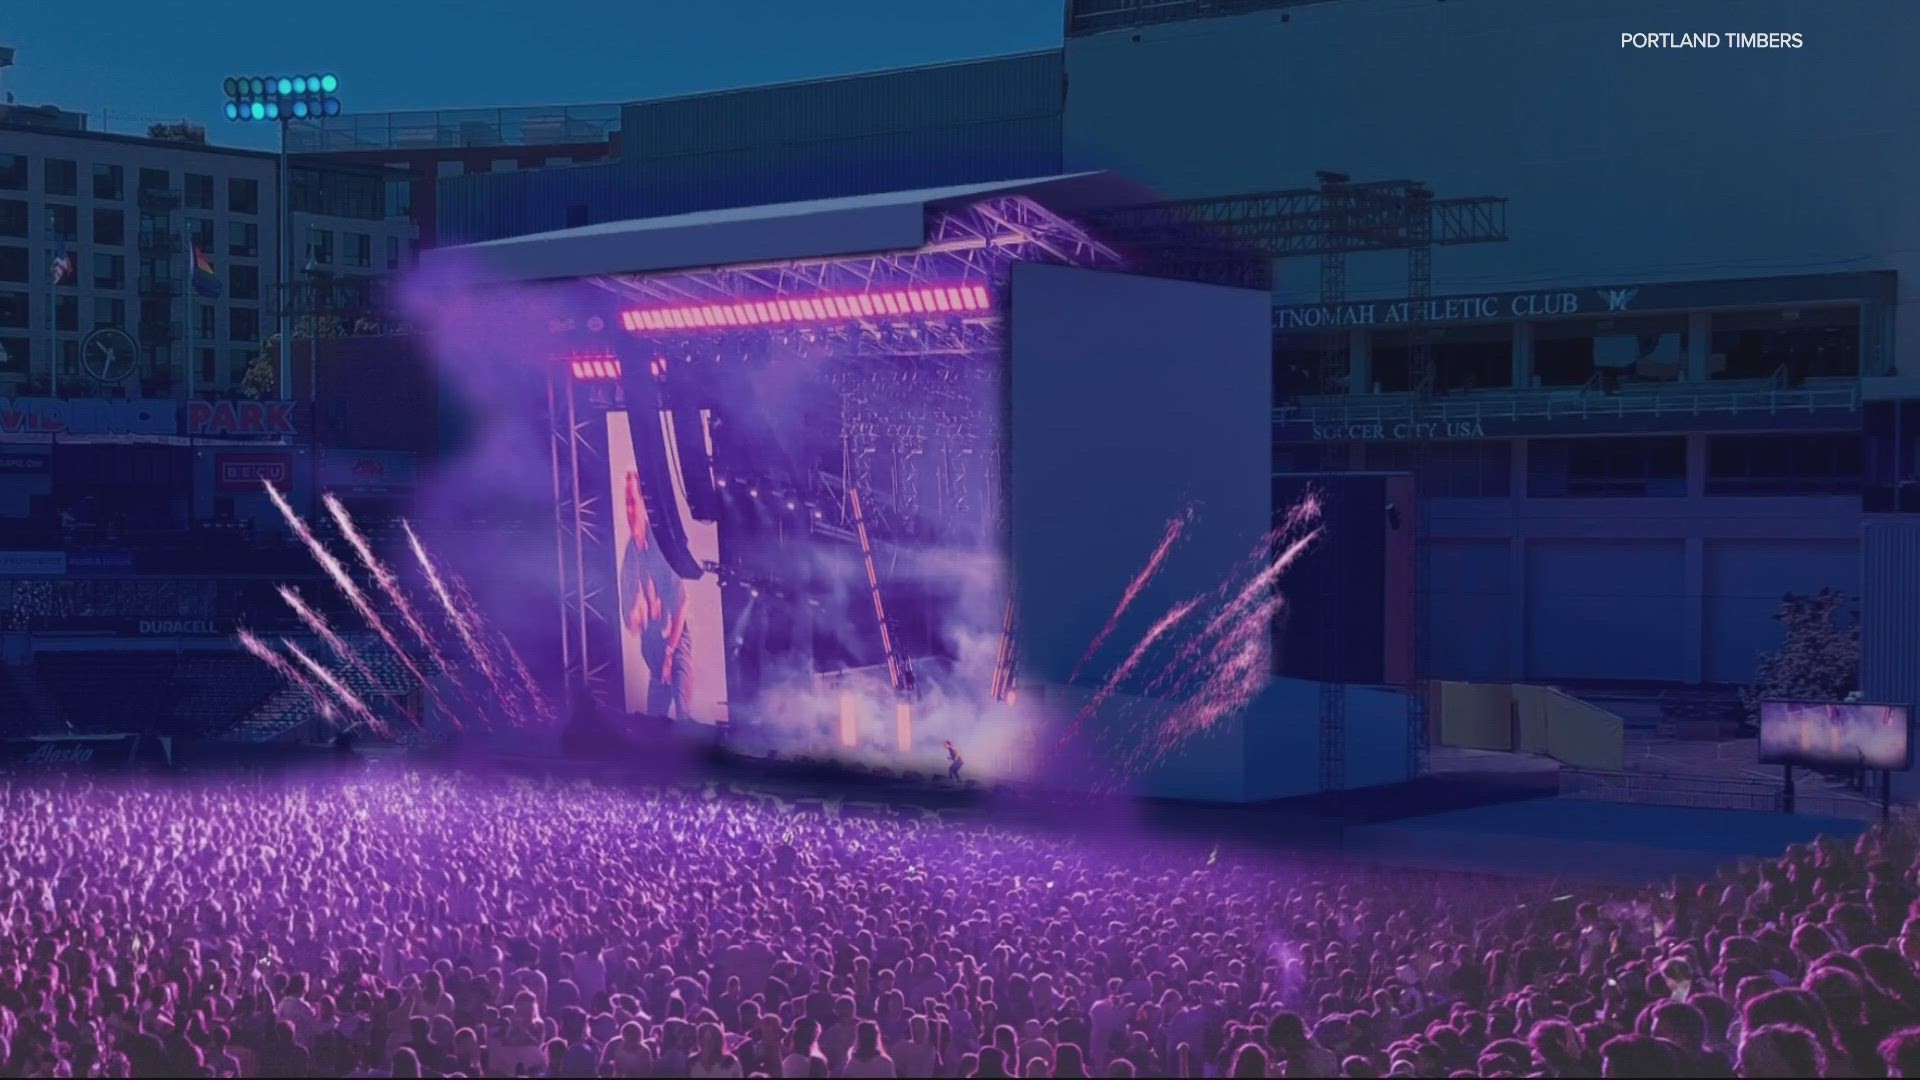 Starting next year, the soccer stadium will host multiple concerts. With a capacity of 30,0000 people, the park will be Portland’s largest music venue.